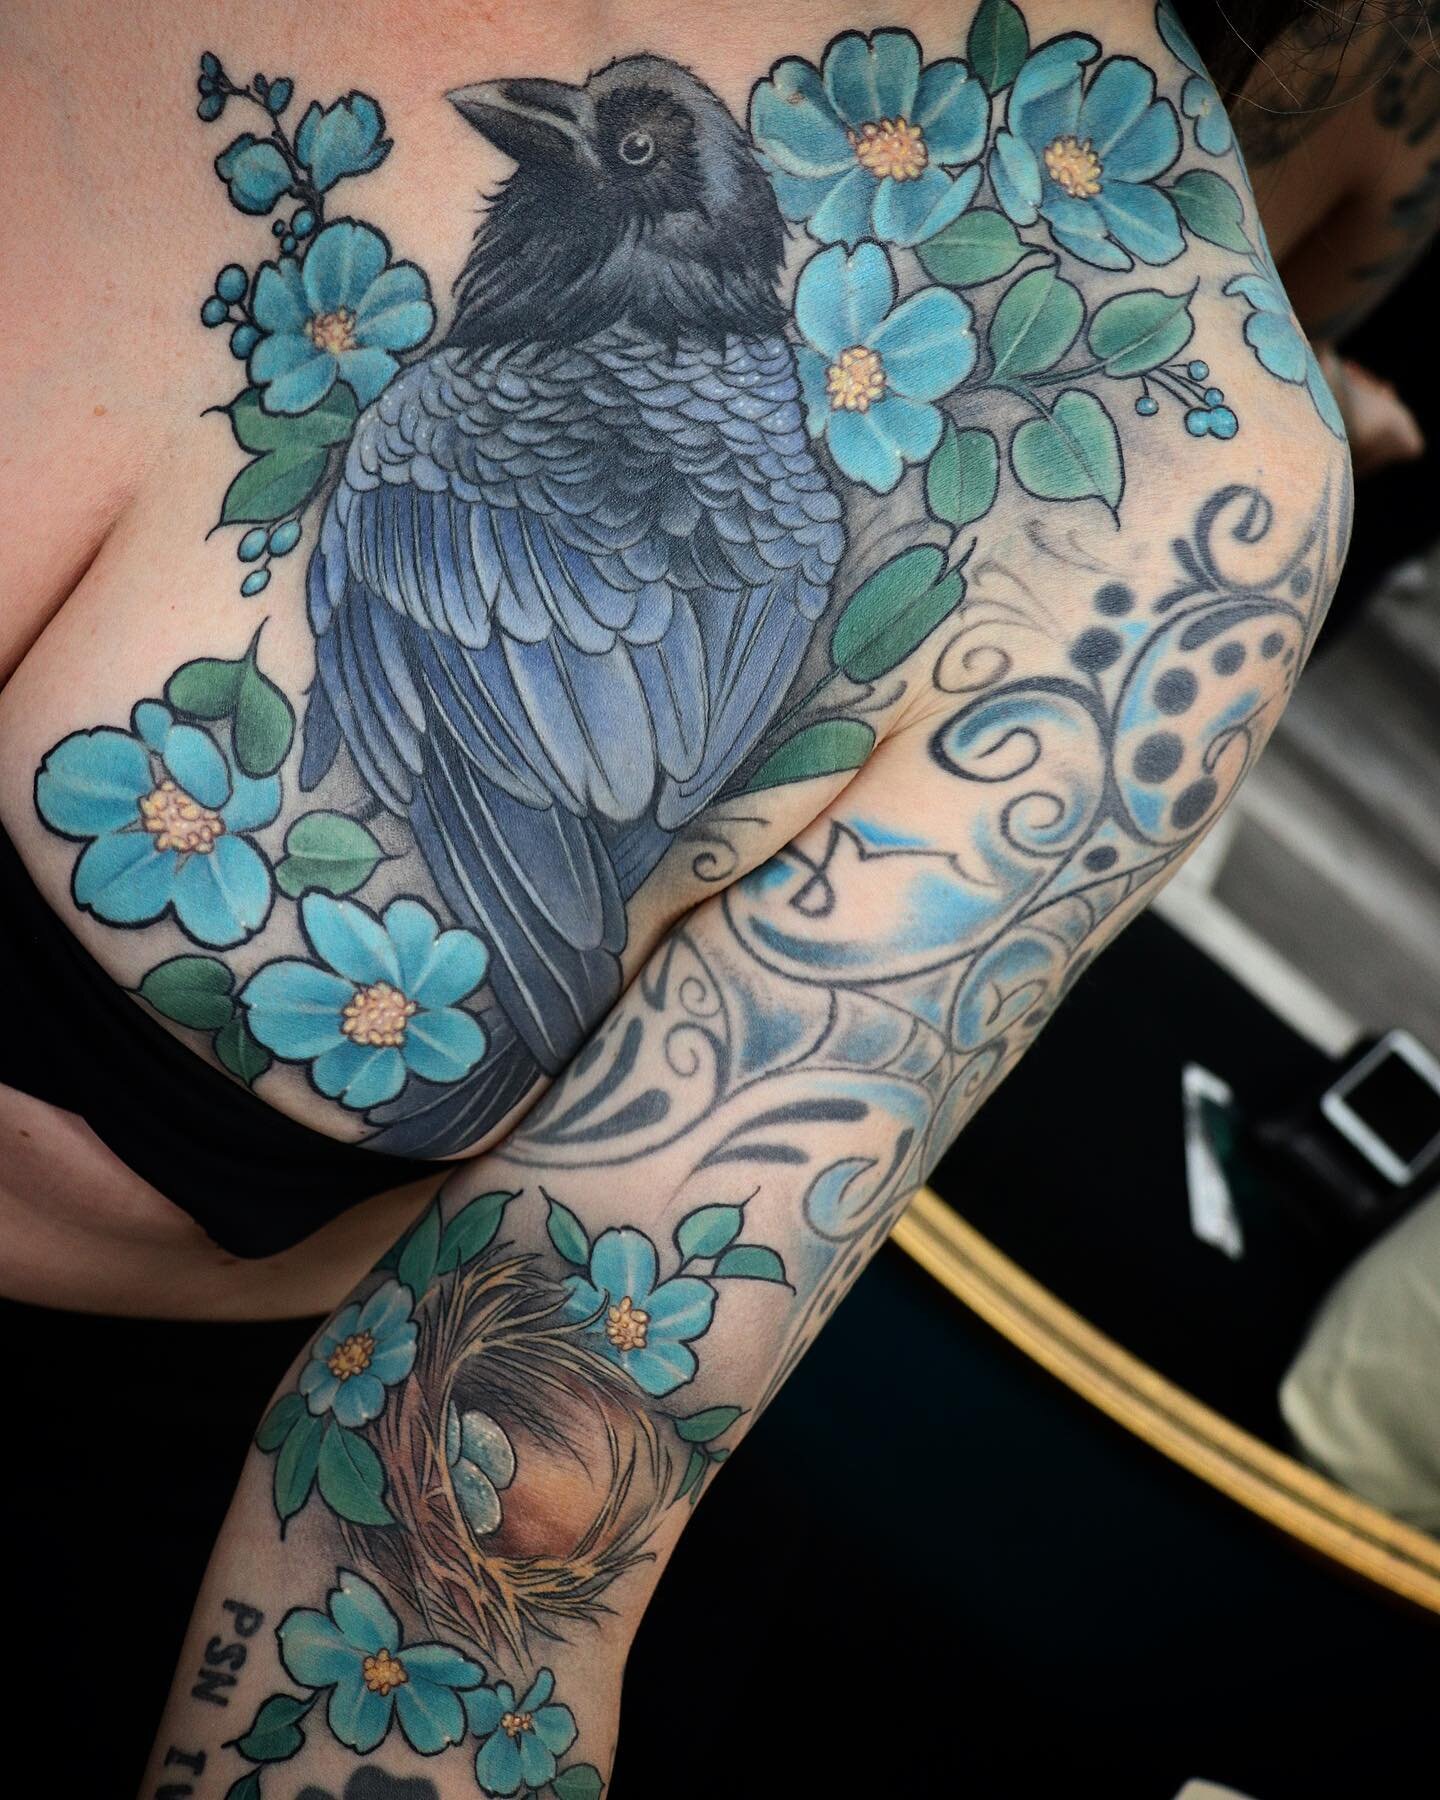 Healed Cover up for my friend Misty✨ Swipe to see before, after many laser sessions. 
. 
Www.lexiraetattoo.com.
.

#tattooart #yyclocal #getink_canada #girlwithtattoos #inked #inkedbabes #inklovers
#yycsmallbusiness #yyctattoo #yyctattoos #calgarycov